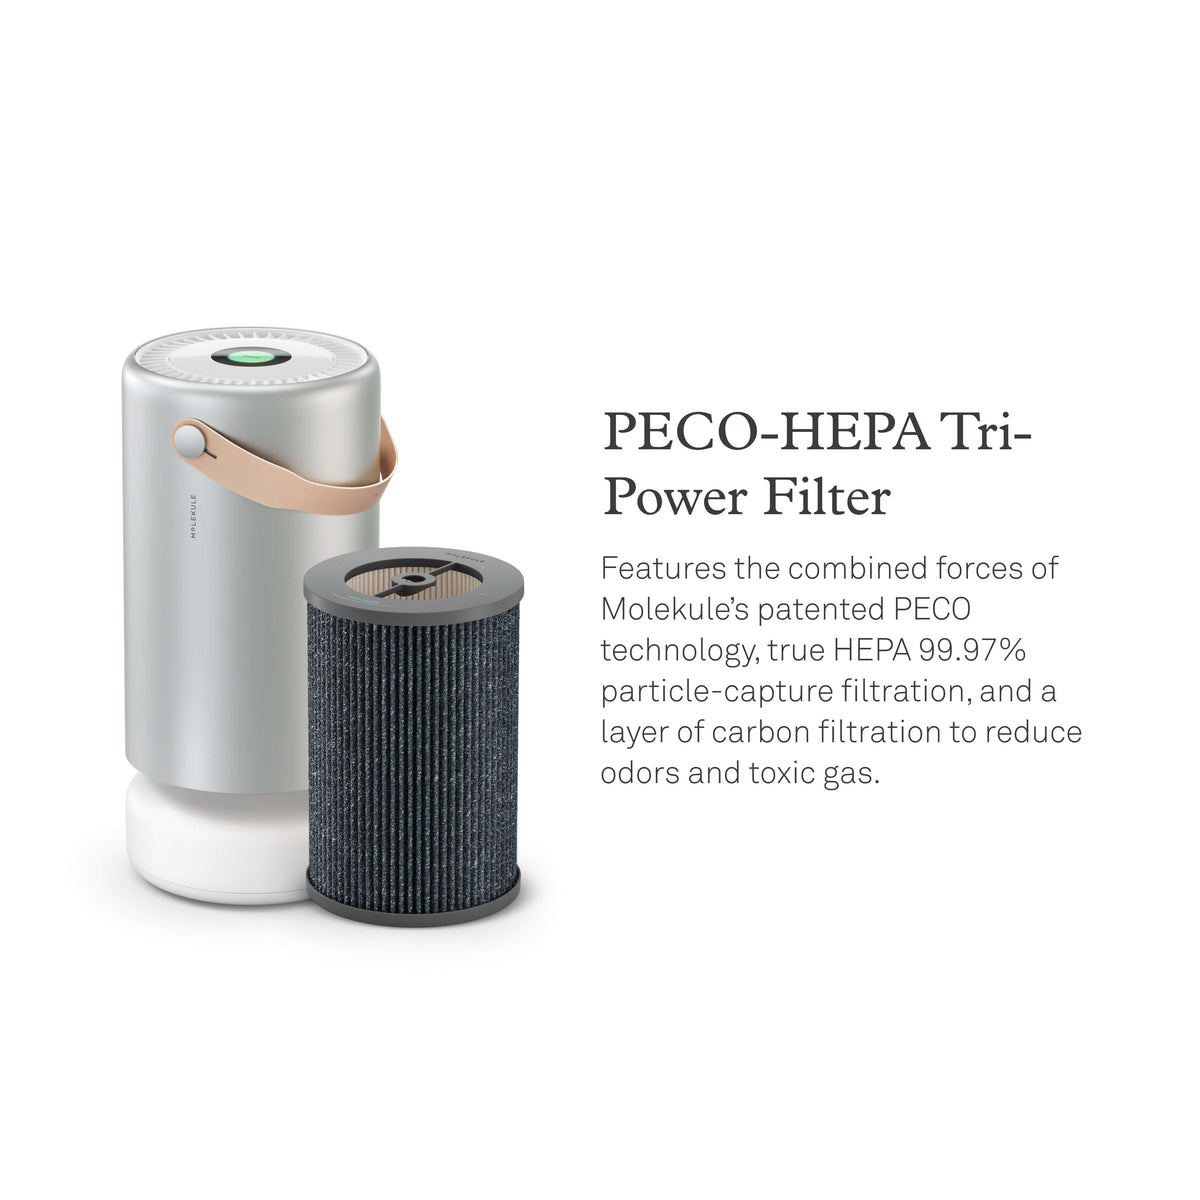 Molekule Air Pro air purifier and replacement filter. PECO-HEPA Tri-Power Filter. Features the combined forces of Molekule’s patented PECO technology, true HEPA 99.97% particle-capture filtration, and a layer of carbon filtration to reduce odors and toxic gas.